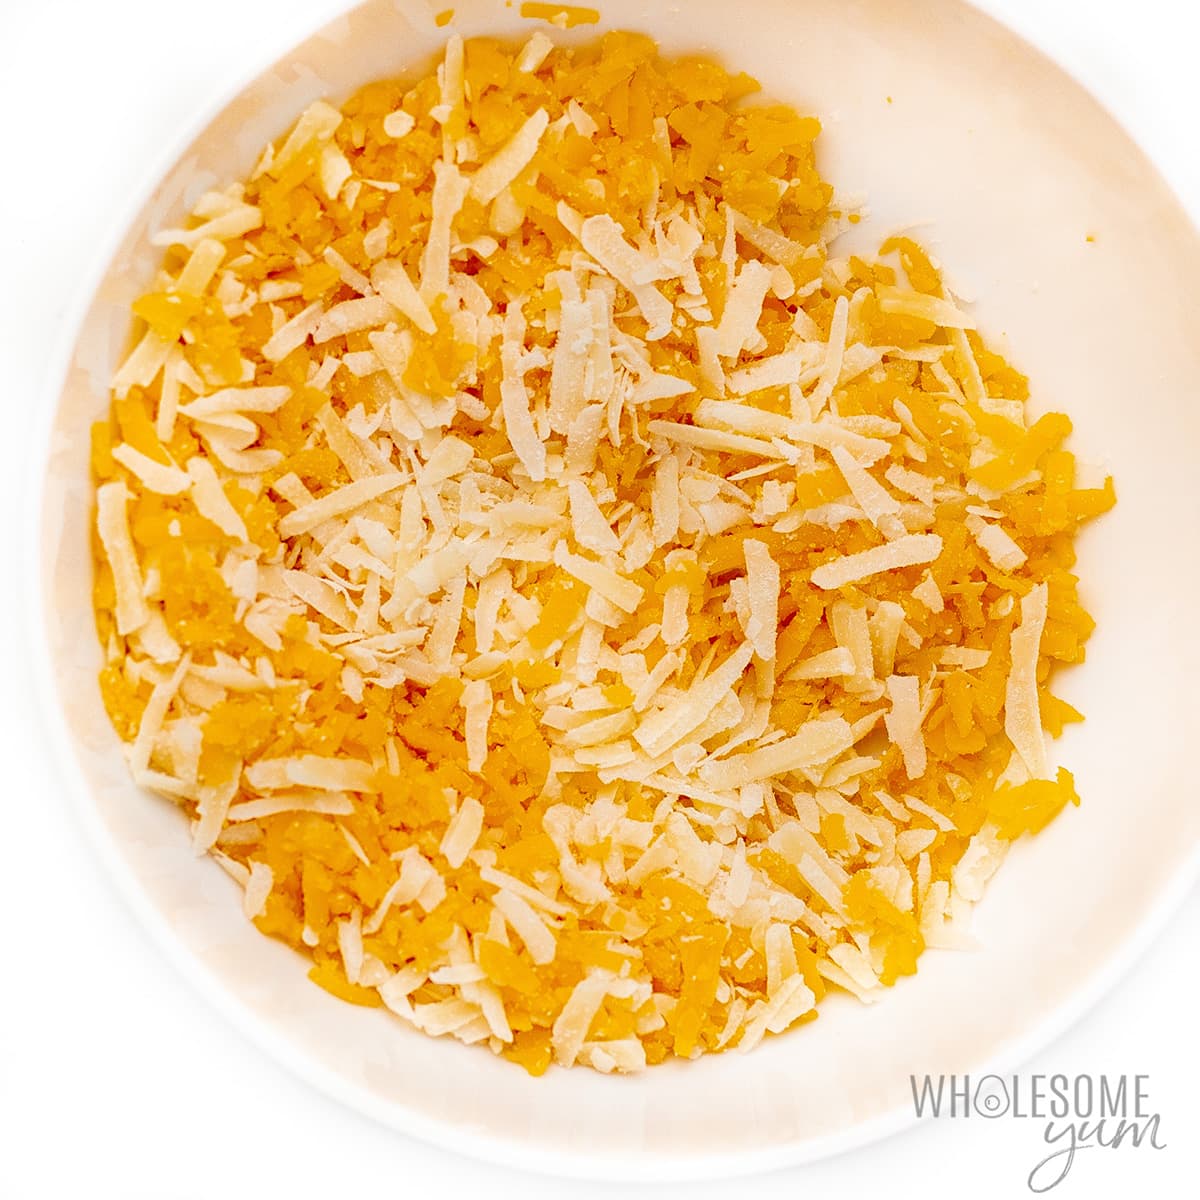 Shredded cheese mixed in a bowl.